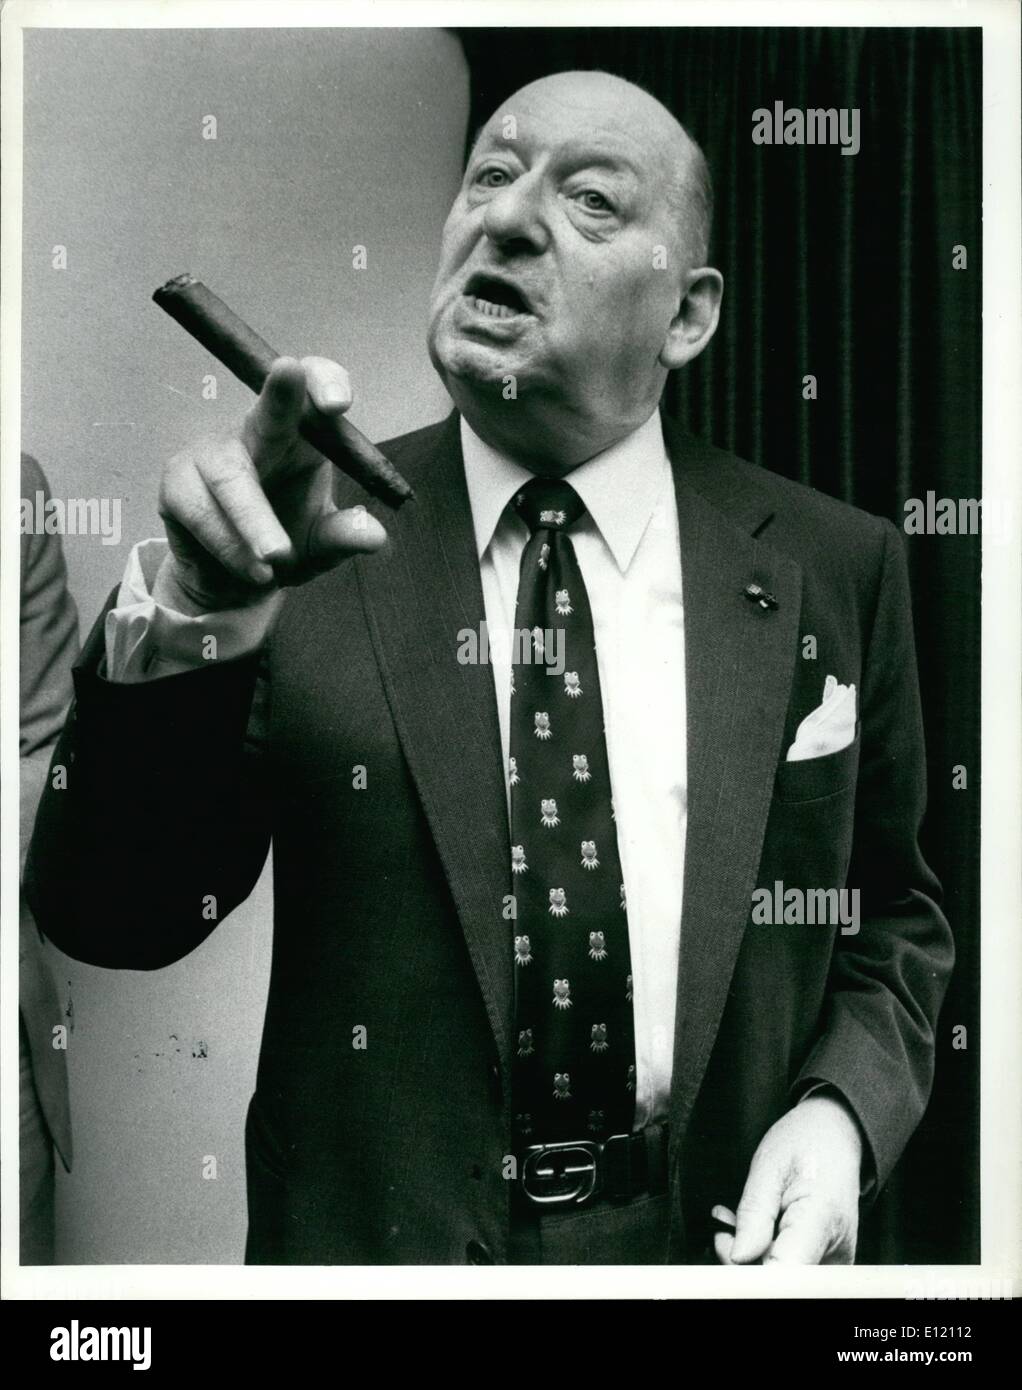 Sep. 09, 1981 - Lord Grade defies his critics: Lord Grade, chairman of the troubled Associated Communications Corporation, defied criticism of his leadership of the company when he faced the annual share holders meeting last week. ''Everyone says i am confident, buoyant and ebullient. Well i am''. During a 40 minute meeting he told his audience of nearly 100 shareholders that he was getting younger every day and denied that his position was threatened by the corporations ,700,000 loss lat year and squashed rumors of a take over threat Stock Photo